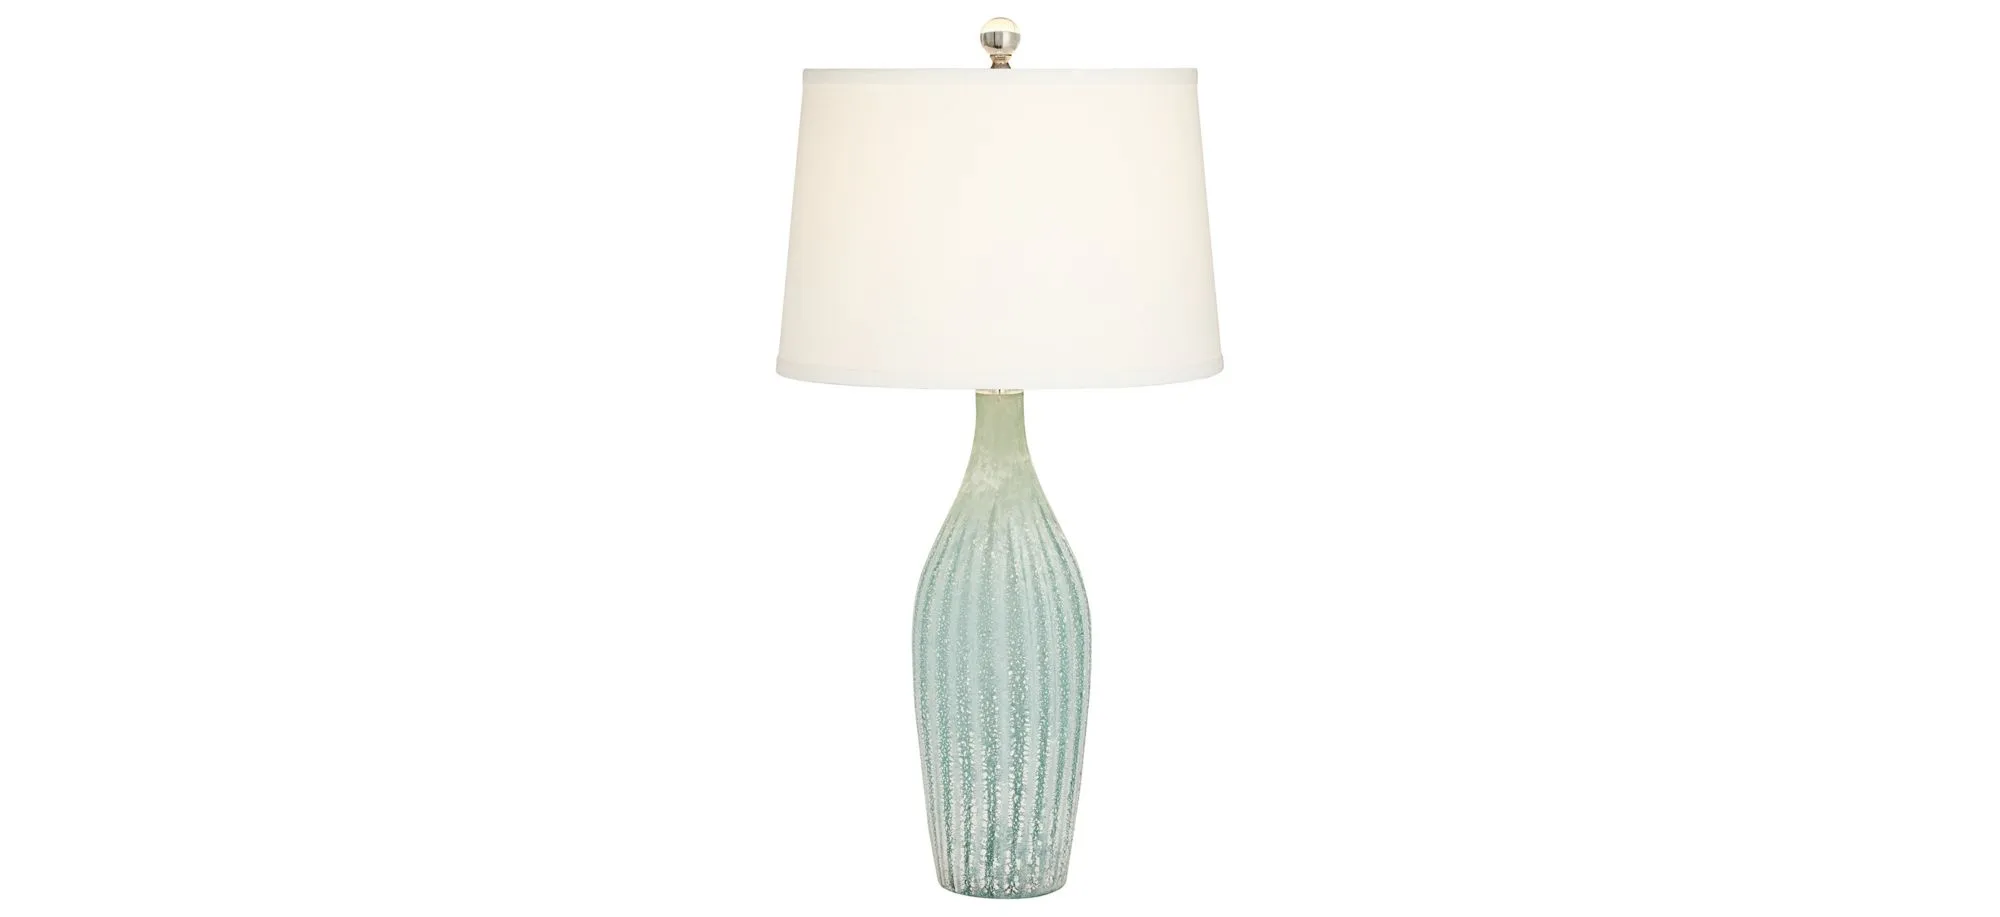 Melanza Table Lamp in Lt.Green-Celadon by Pacific Coast